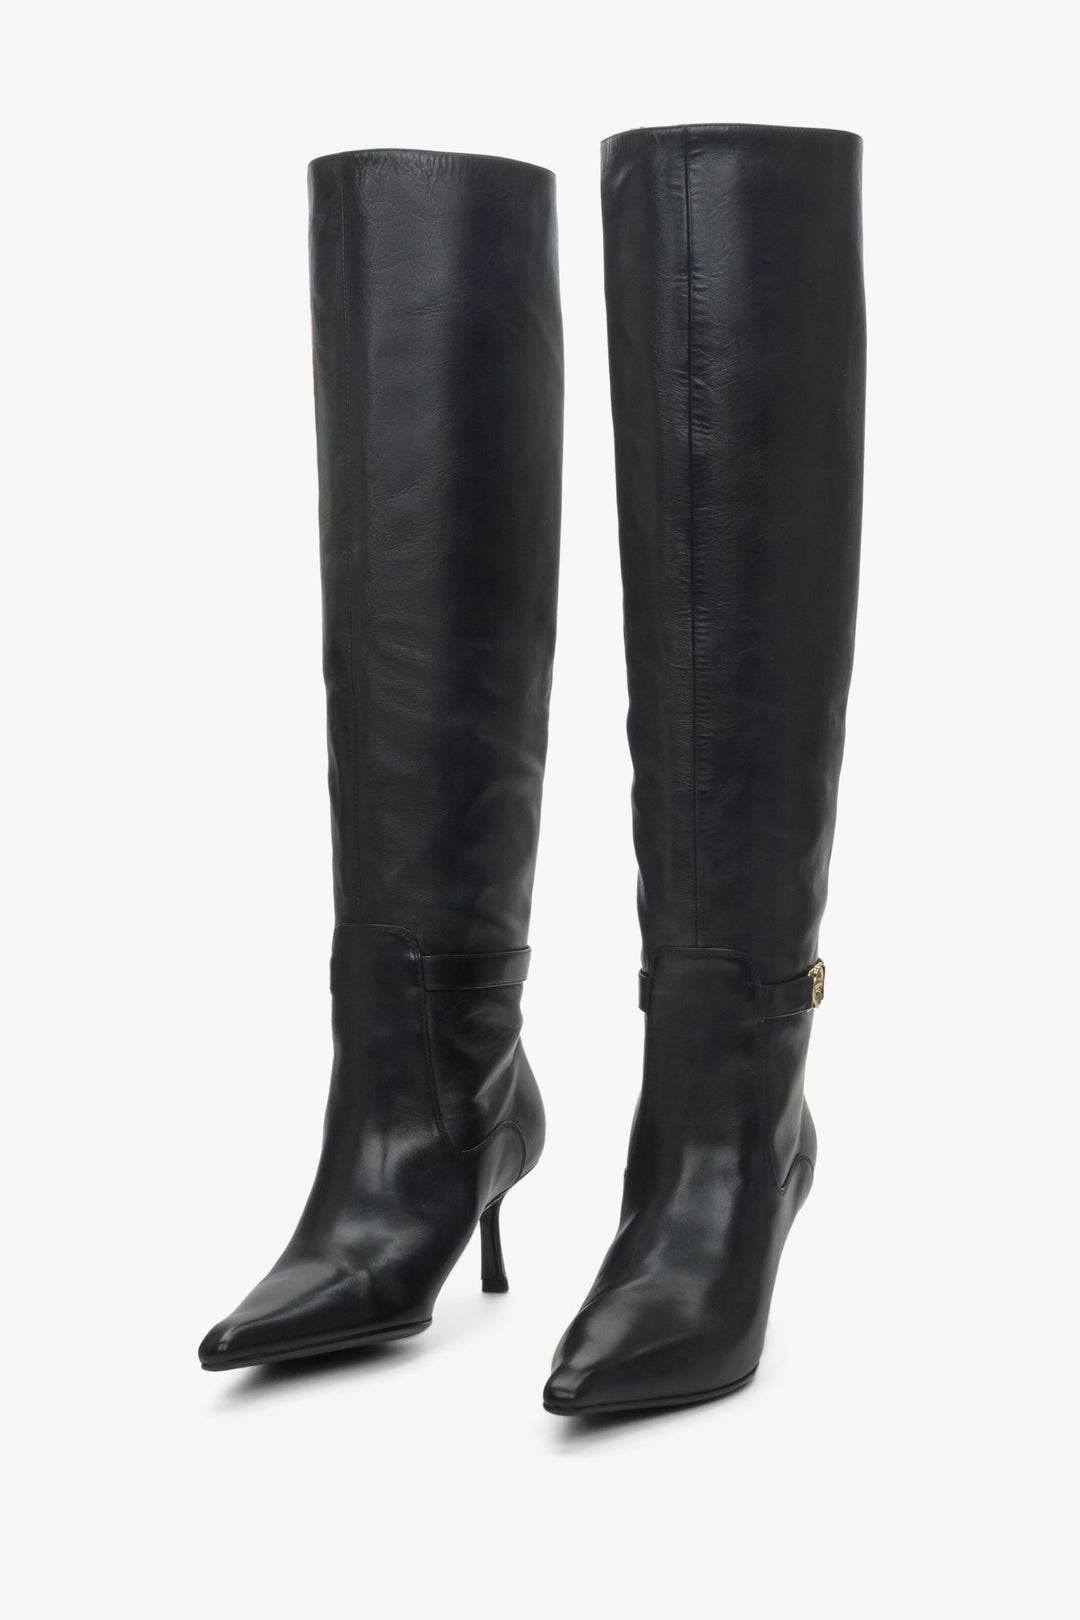 Women's high black boots by Estro made of genuine leather - close-up on the front of the model.